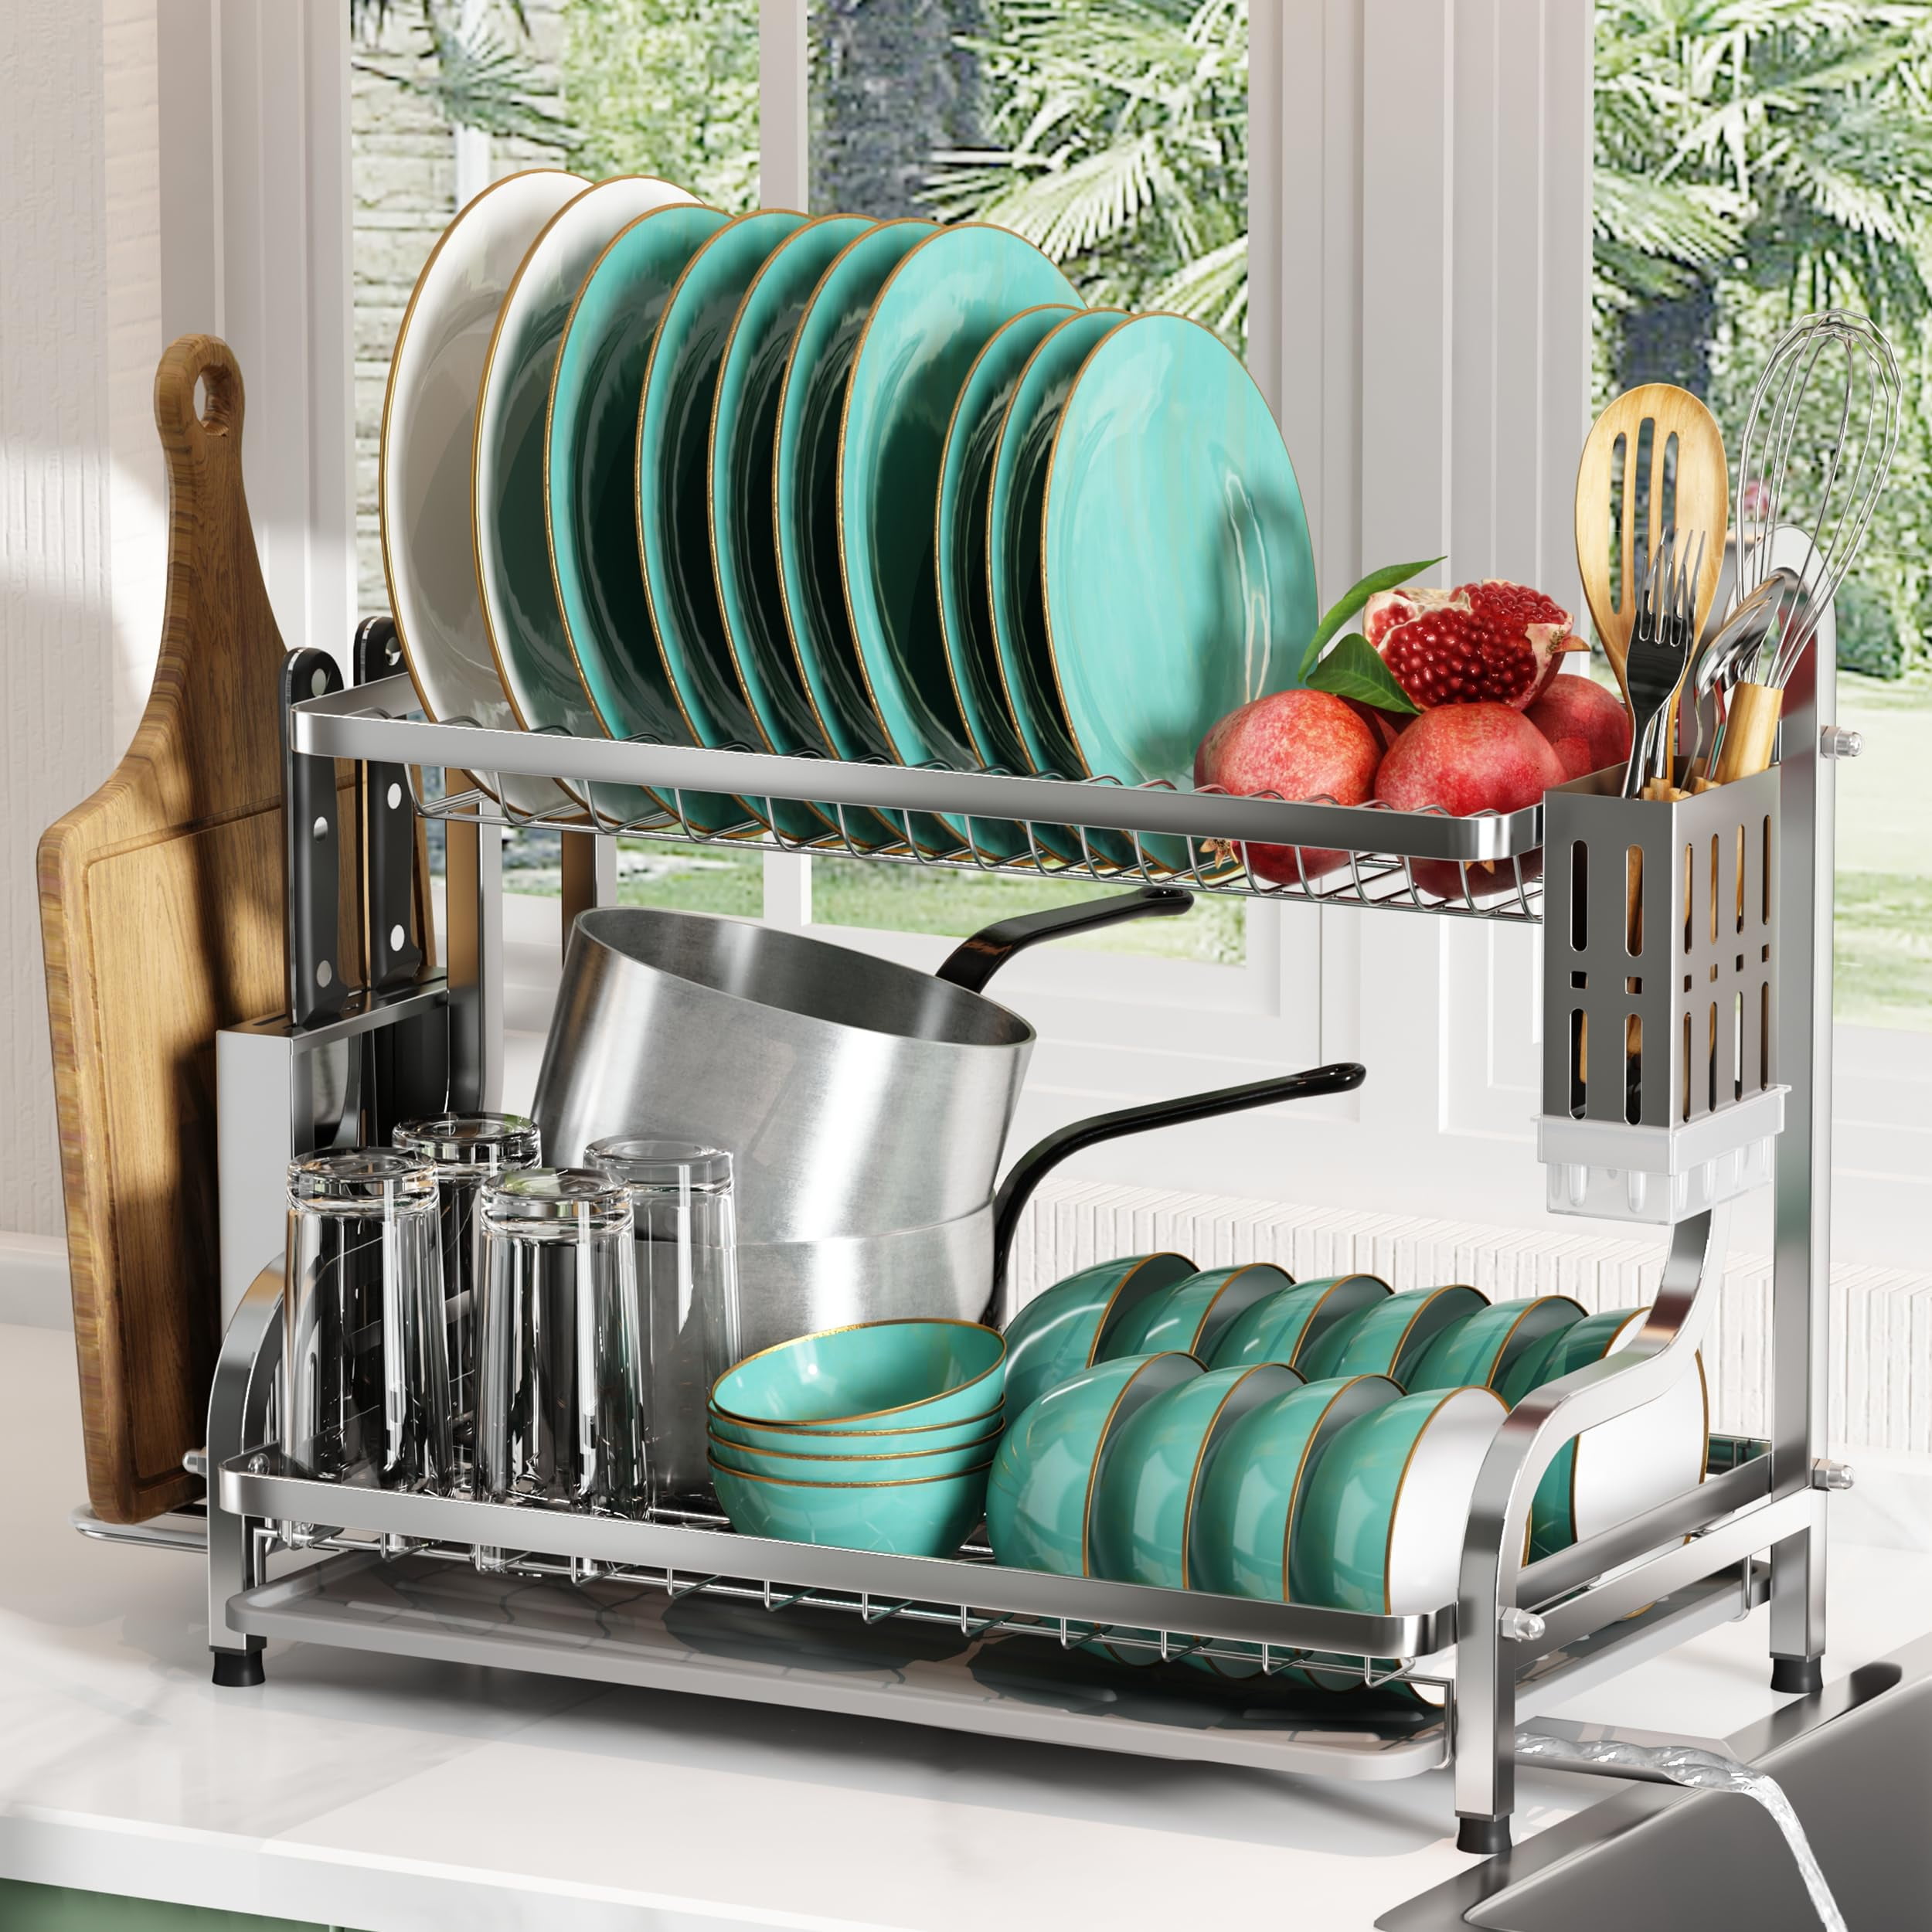 2-tier Rust-proof Dish Drying Rack With Knife Holder, Cutting